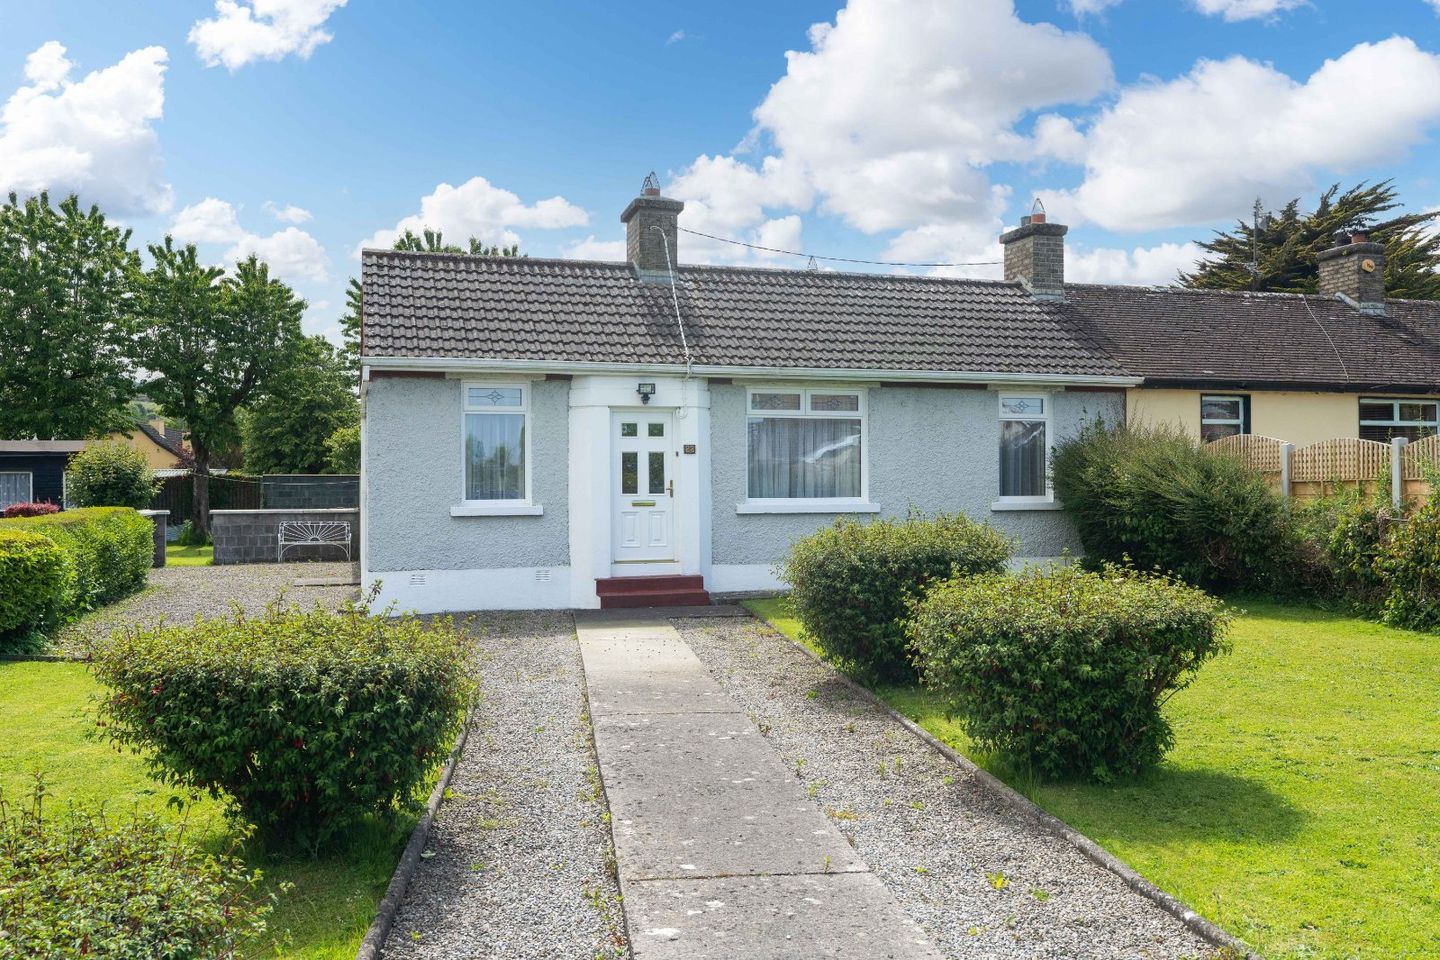 22 Old Court Cottages, Old Court Road, Ballycullen, Dublin 24